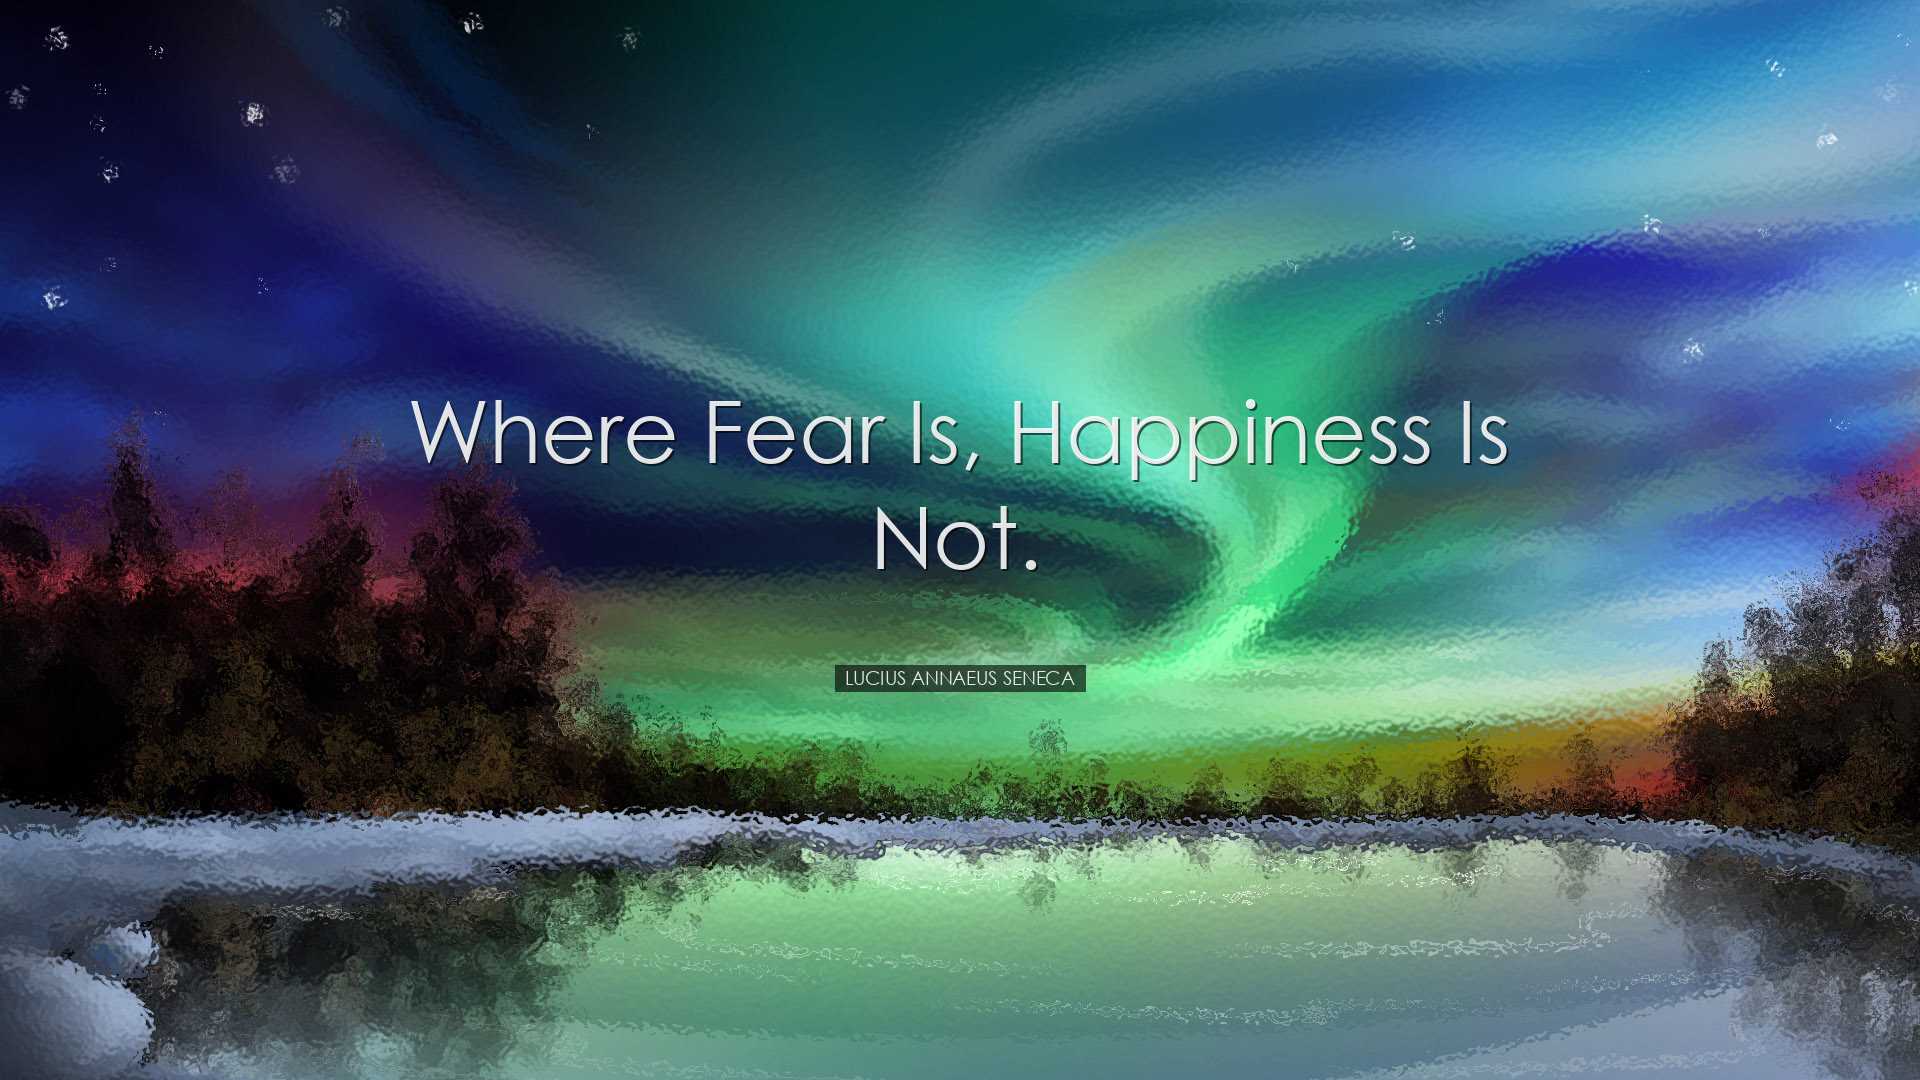 Where fear is, happiness is not. - Lucius Annaeus Seneca